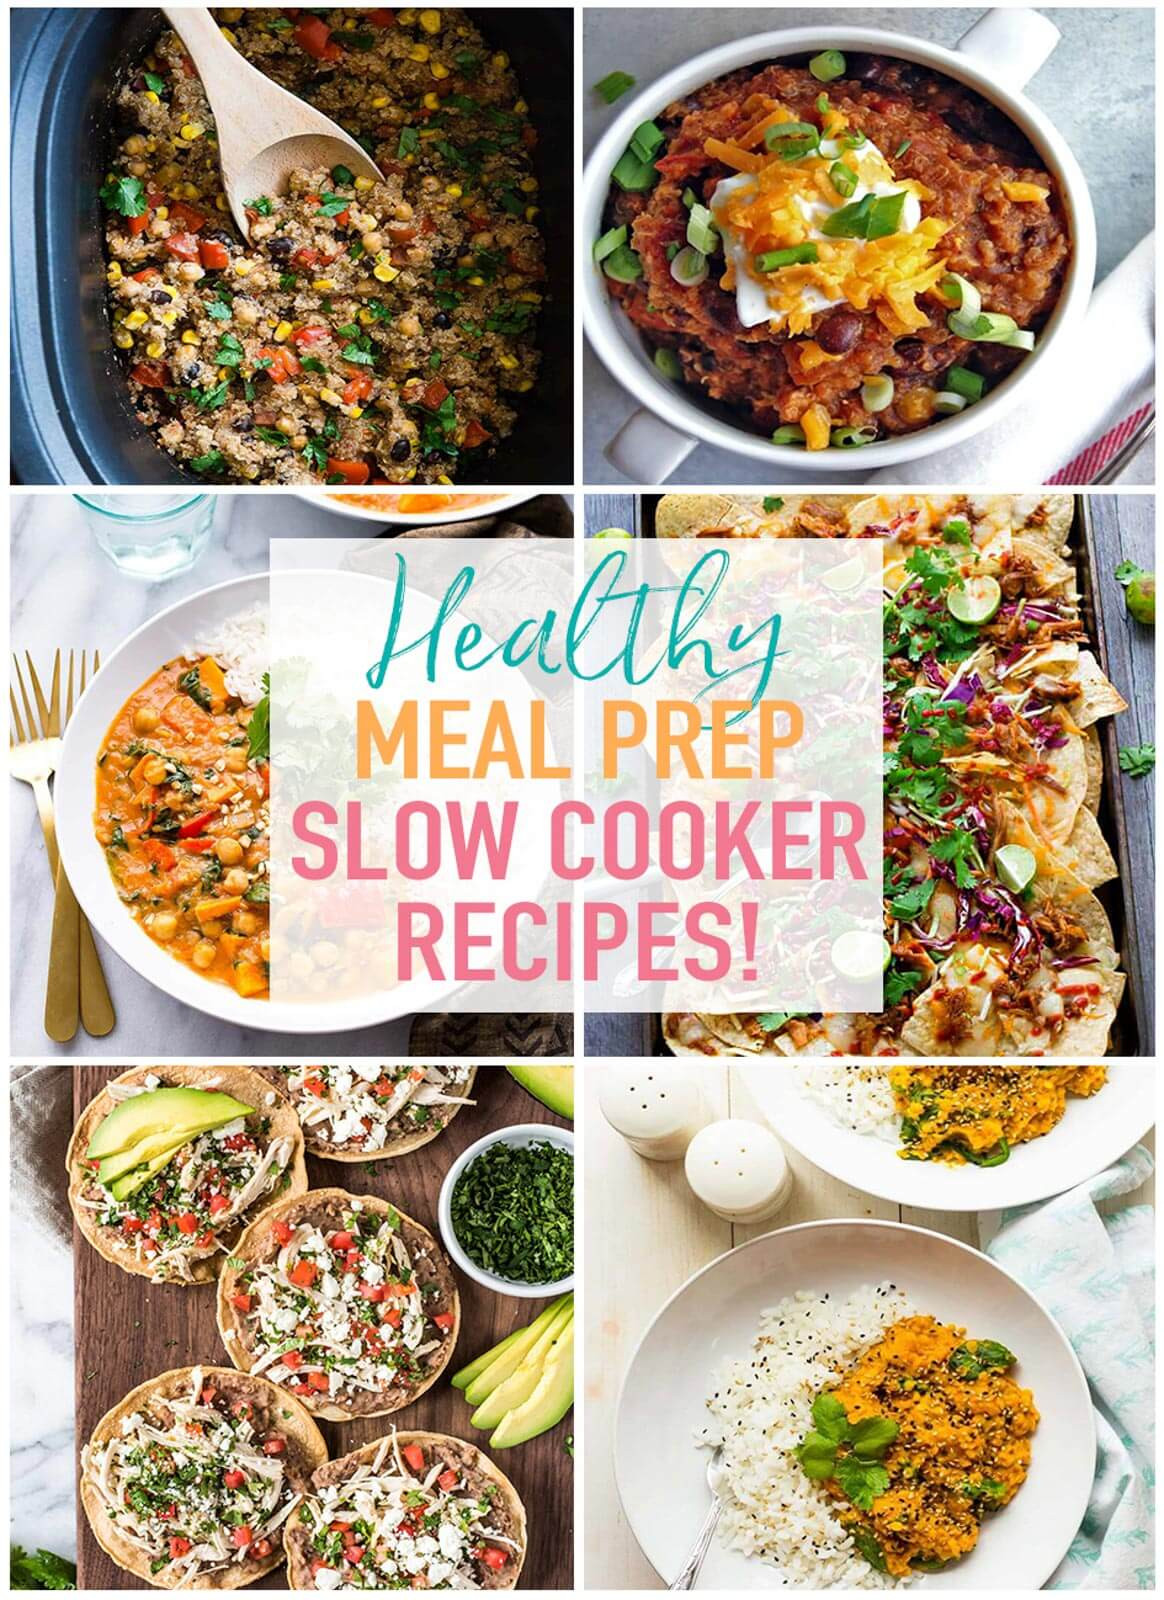 Healthy Slow Cooker Recipes for Two People the Best Ideas for Healthy Slow Cooker Recipes for Meal Prep the Girl On Bloor